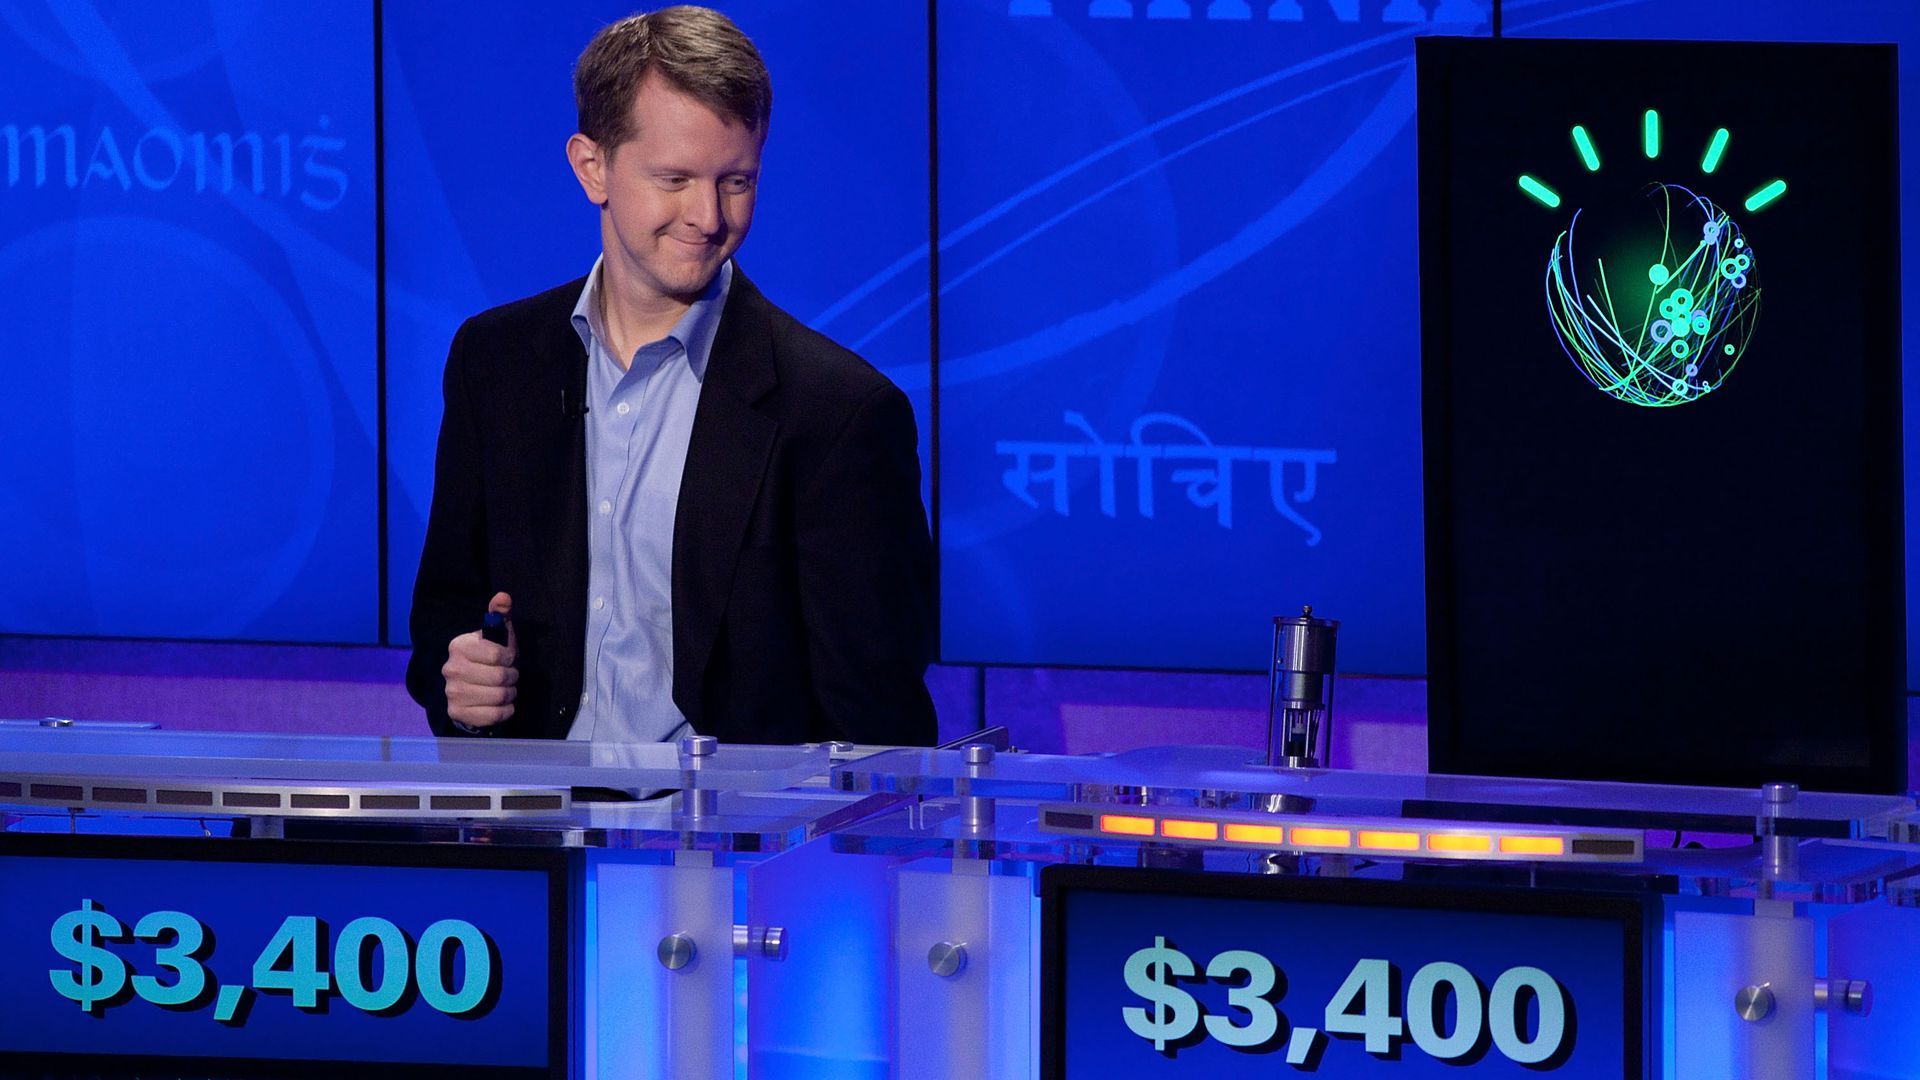 Ken Jennings (he's the human) plays IBM's Watson AI system at Jeopardy on Jan. 13, 2011.